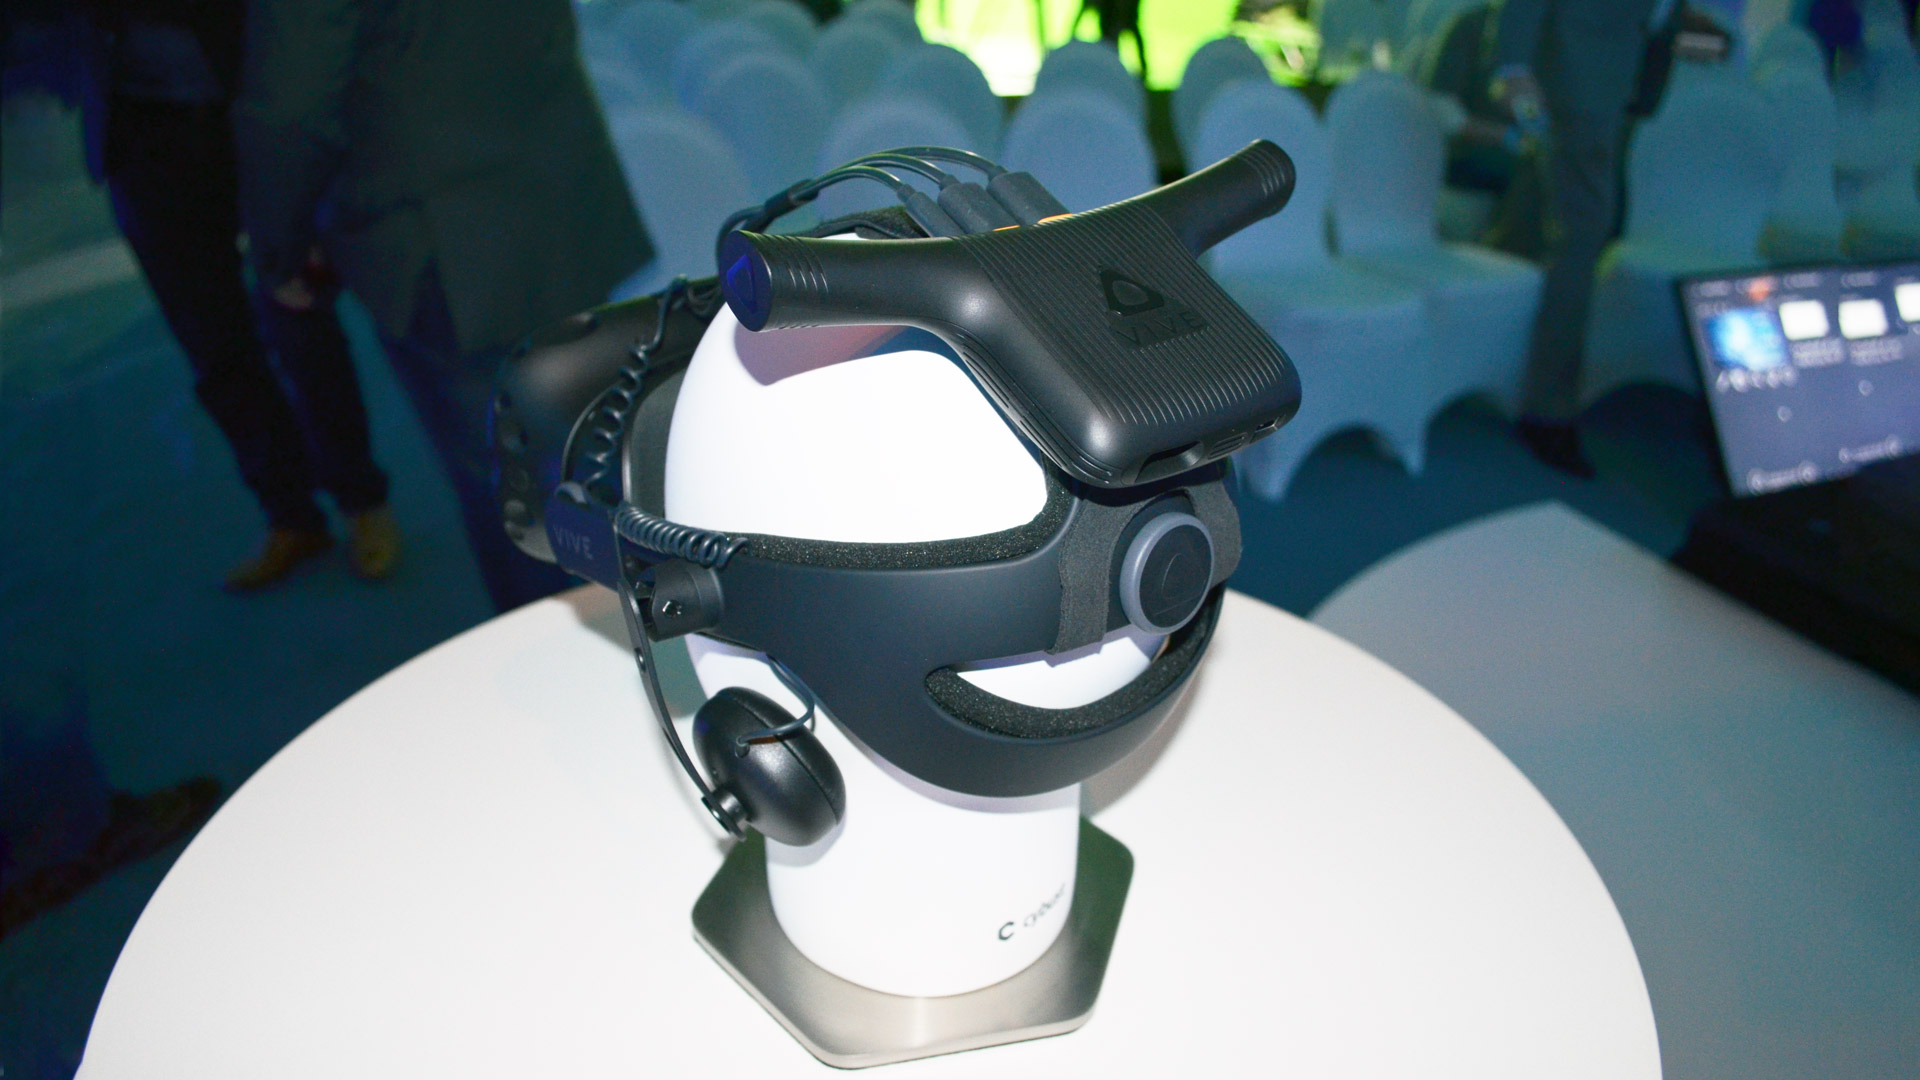 CES 2018: HTC's Vive Wireless to Support Both Vive and Vive Pro at